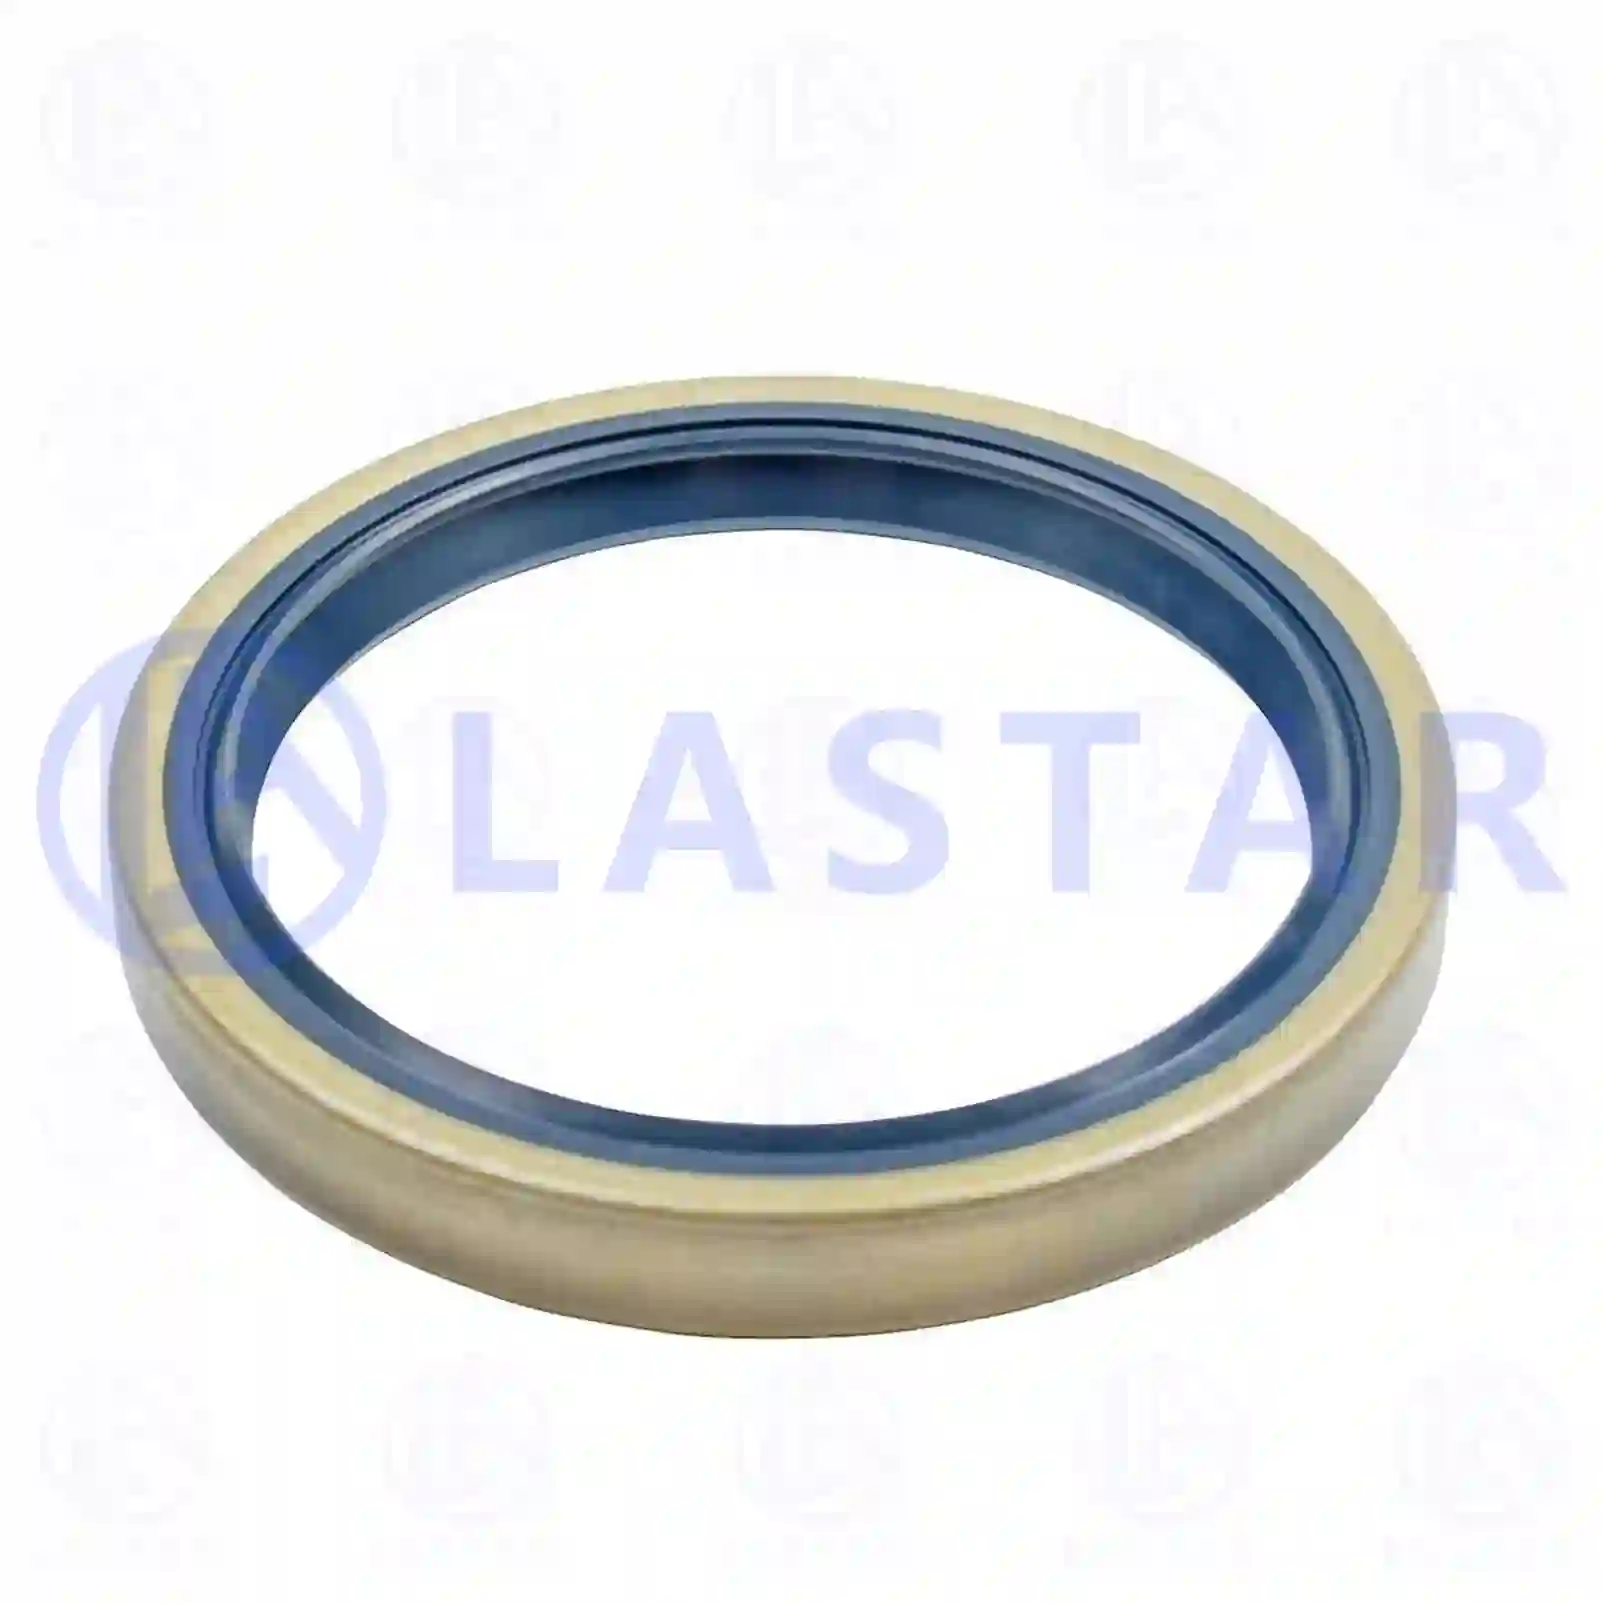 Oil seal, 77730506, 0578507, 578507, 02964749, 06562890033, 06562890167, 81865010915, 81965010915, 87661604306, 0049970746, 0079979946, 0099971146, 0119974246, 5000281567, 306901, 386901 ||  77730506 Lastar Spare Part | Truck Spare Parts, Auotomotive Spare Parts Oil seal, 77730506, 0578507, 578507, 02964749, 06562890033, 06562890167, 81865010915, 81965010915, 87661604306, 0049970746, 0079979946, 0099971146, 0119974246, 5000281567, 306901, 386901 ||  77730506 Lastar Spare Part | Truck Spare Parts, Auotomotive Spare Parts